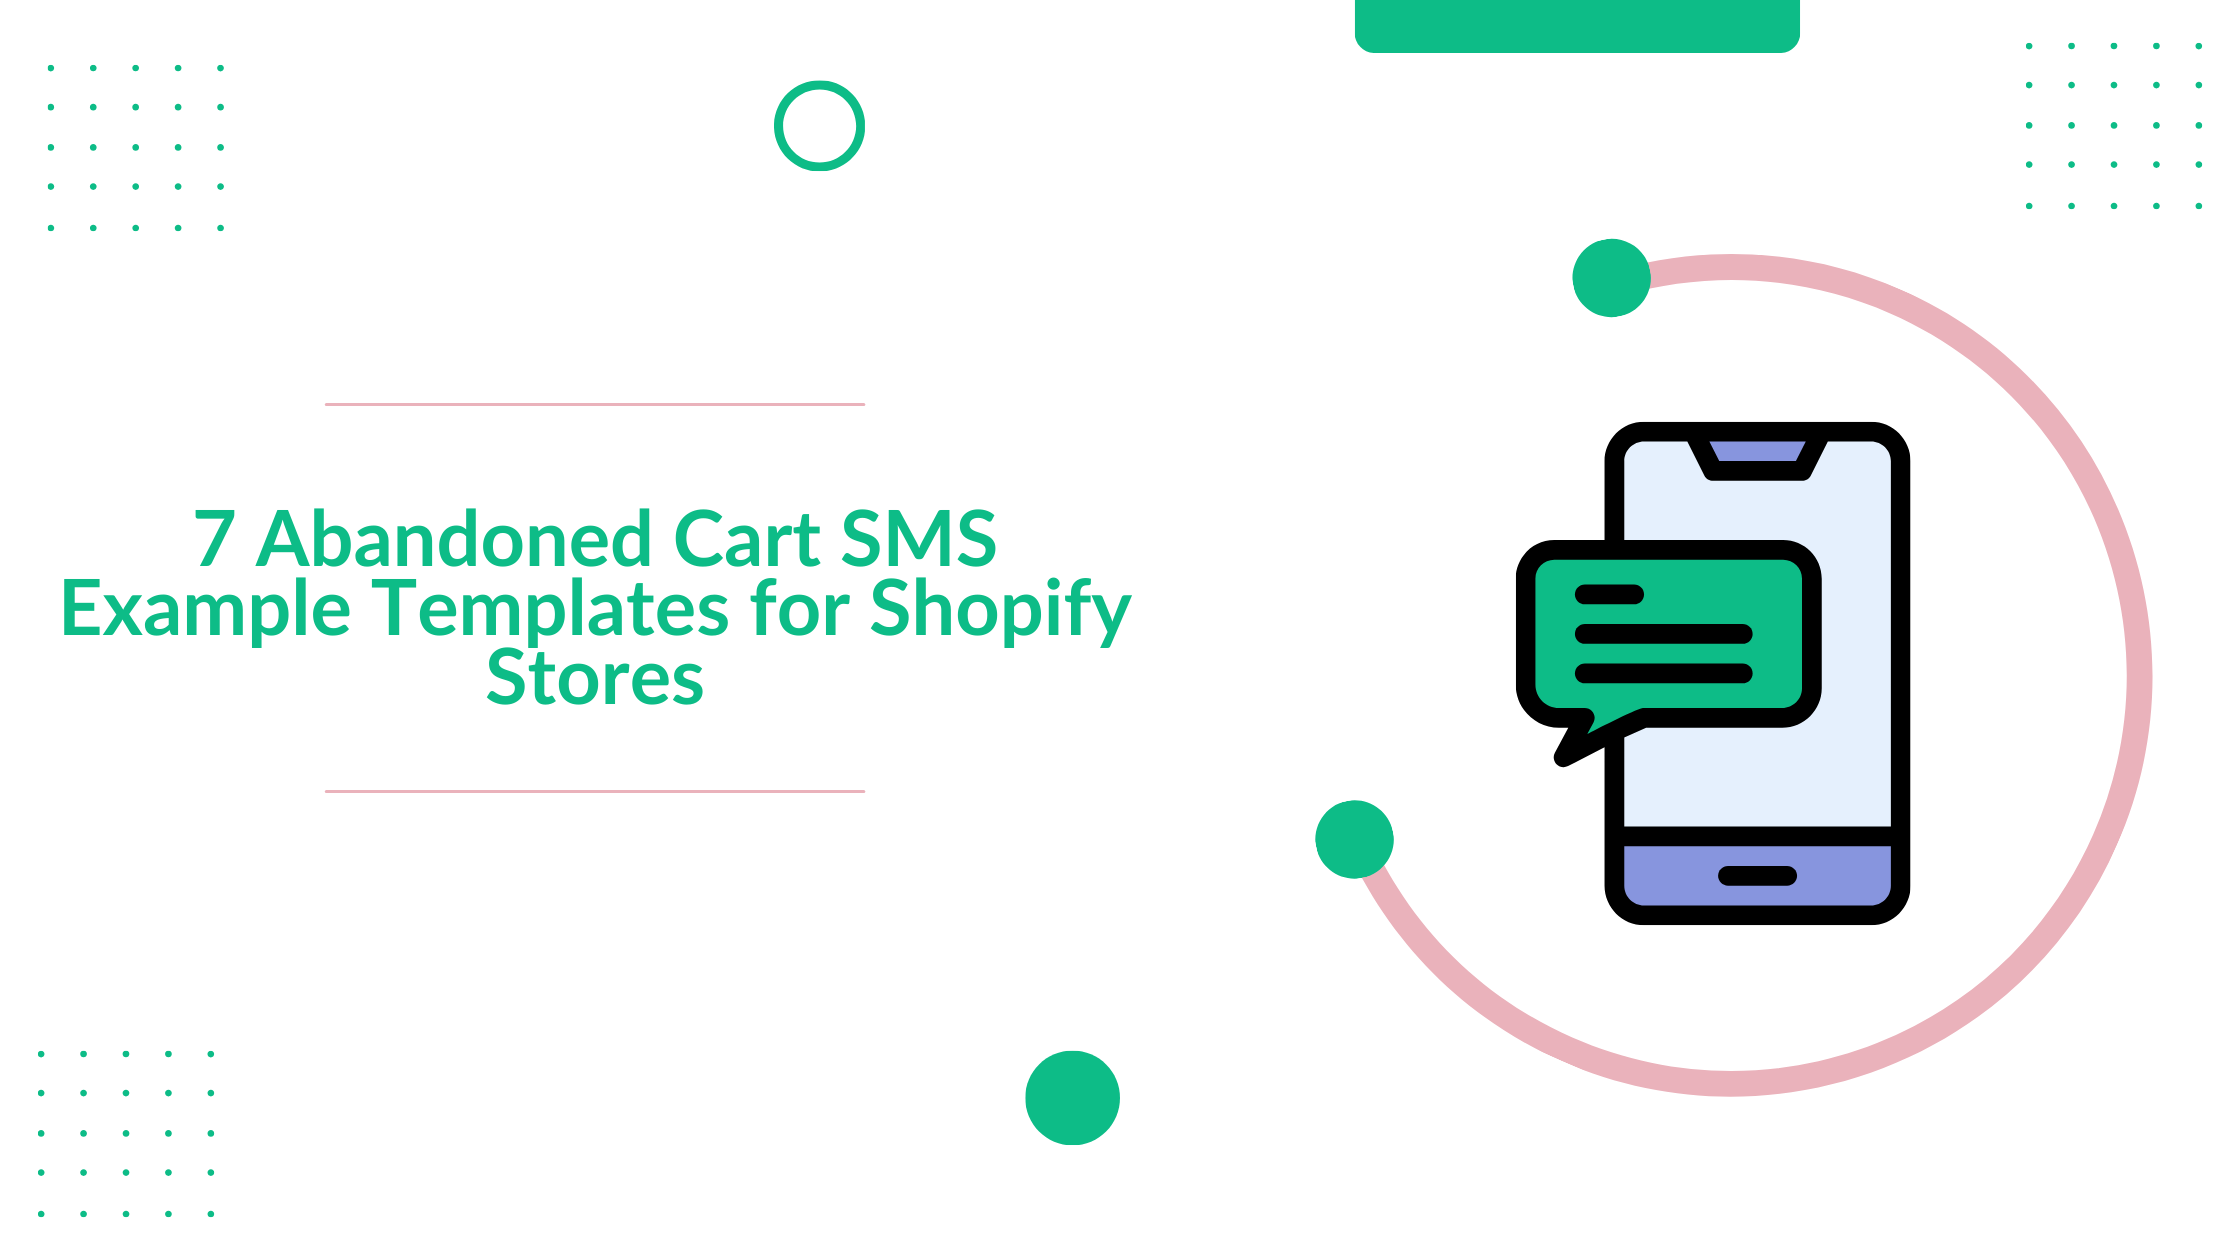 7 Abandoned Cart SMS Example Templates for Shopify Stores